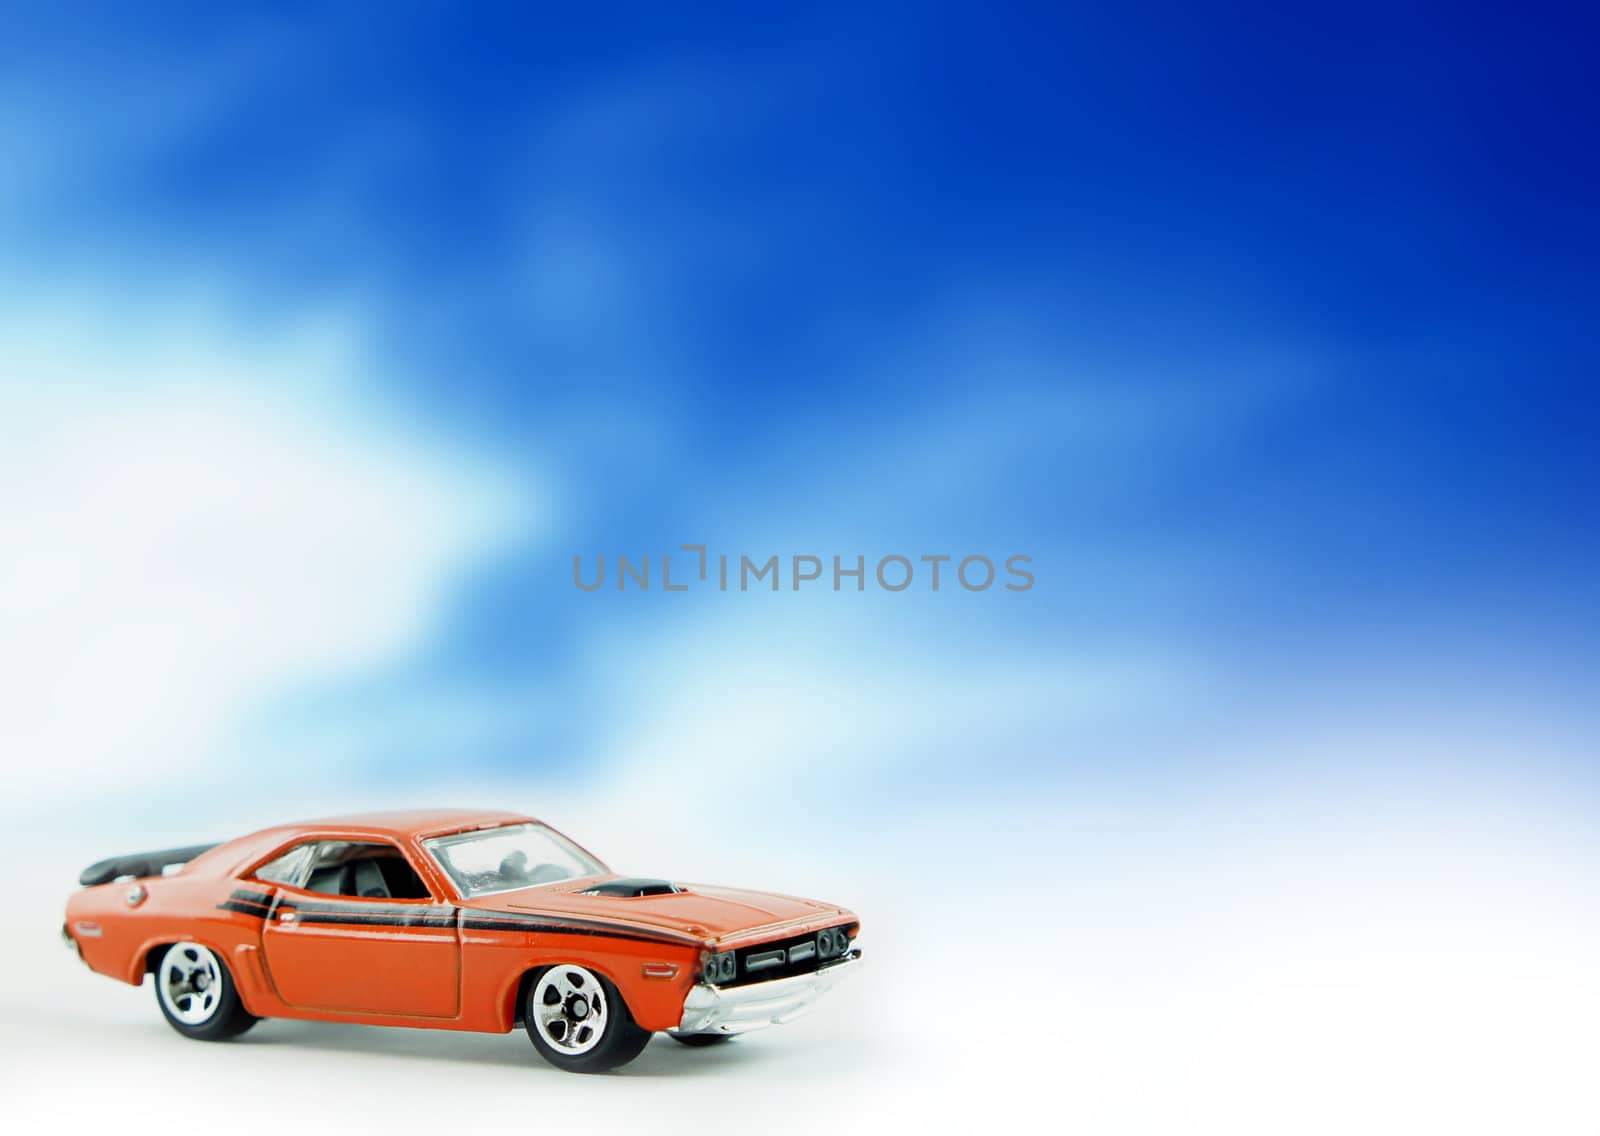 Dodge Challenger replica car on cloud background.